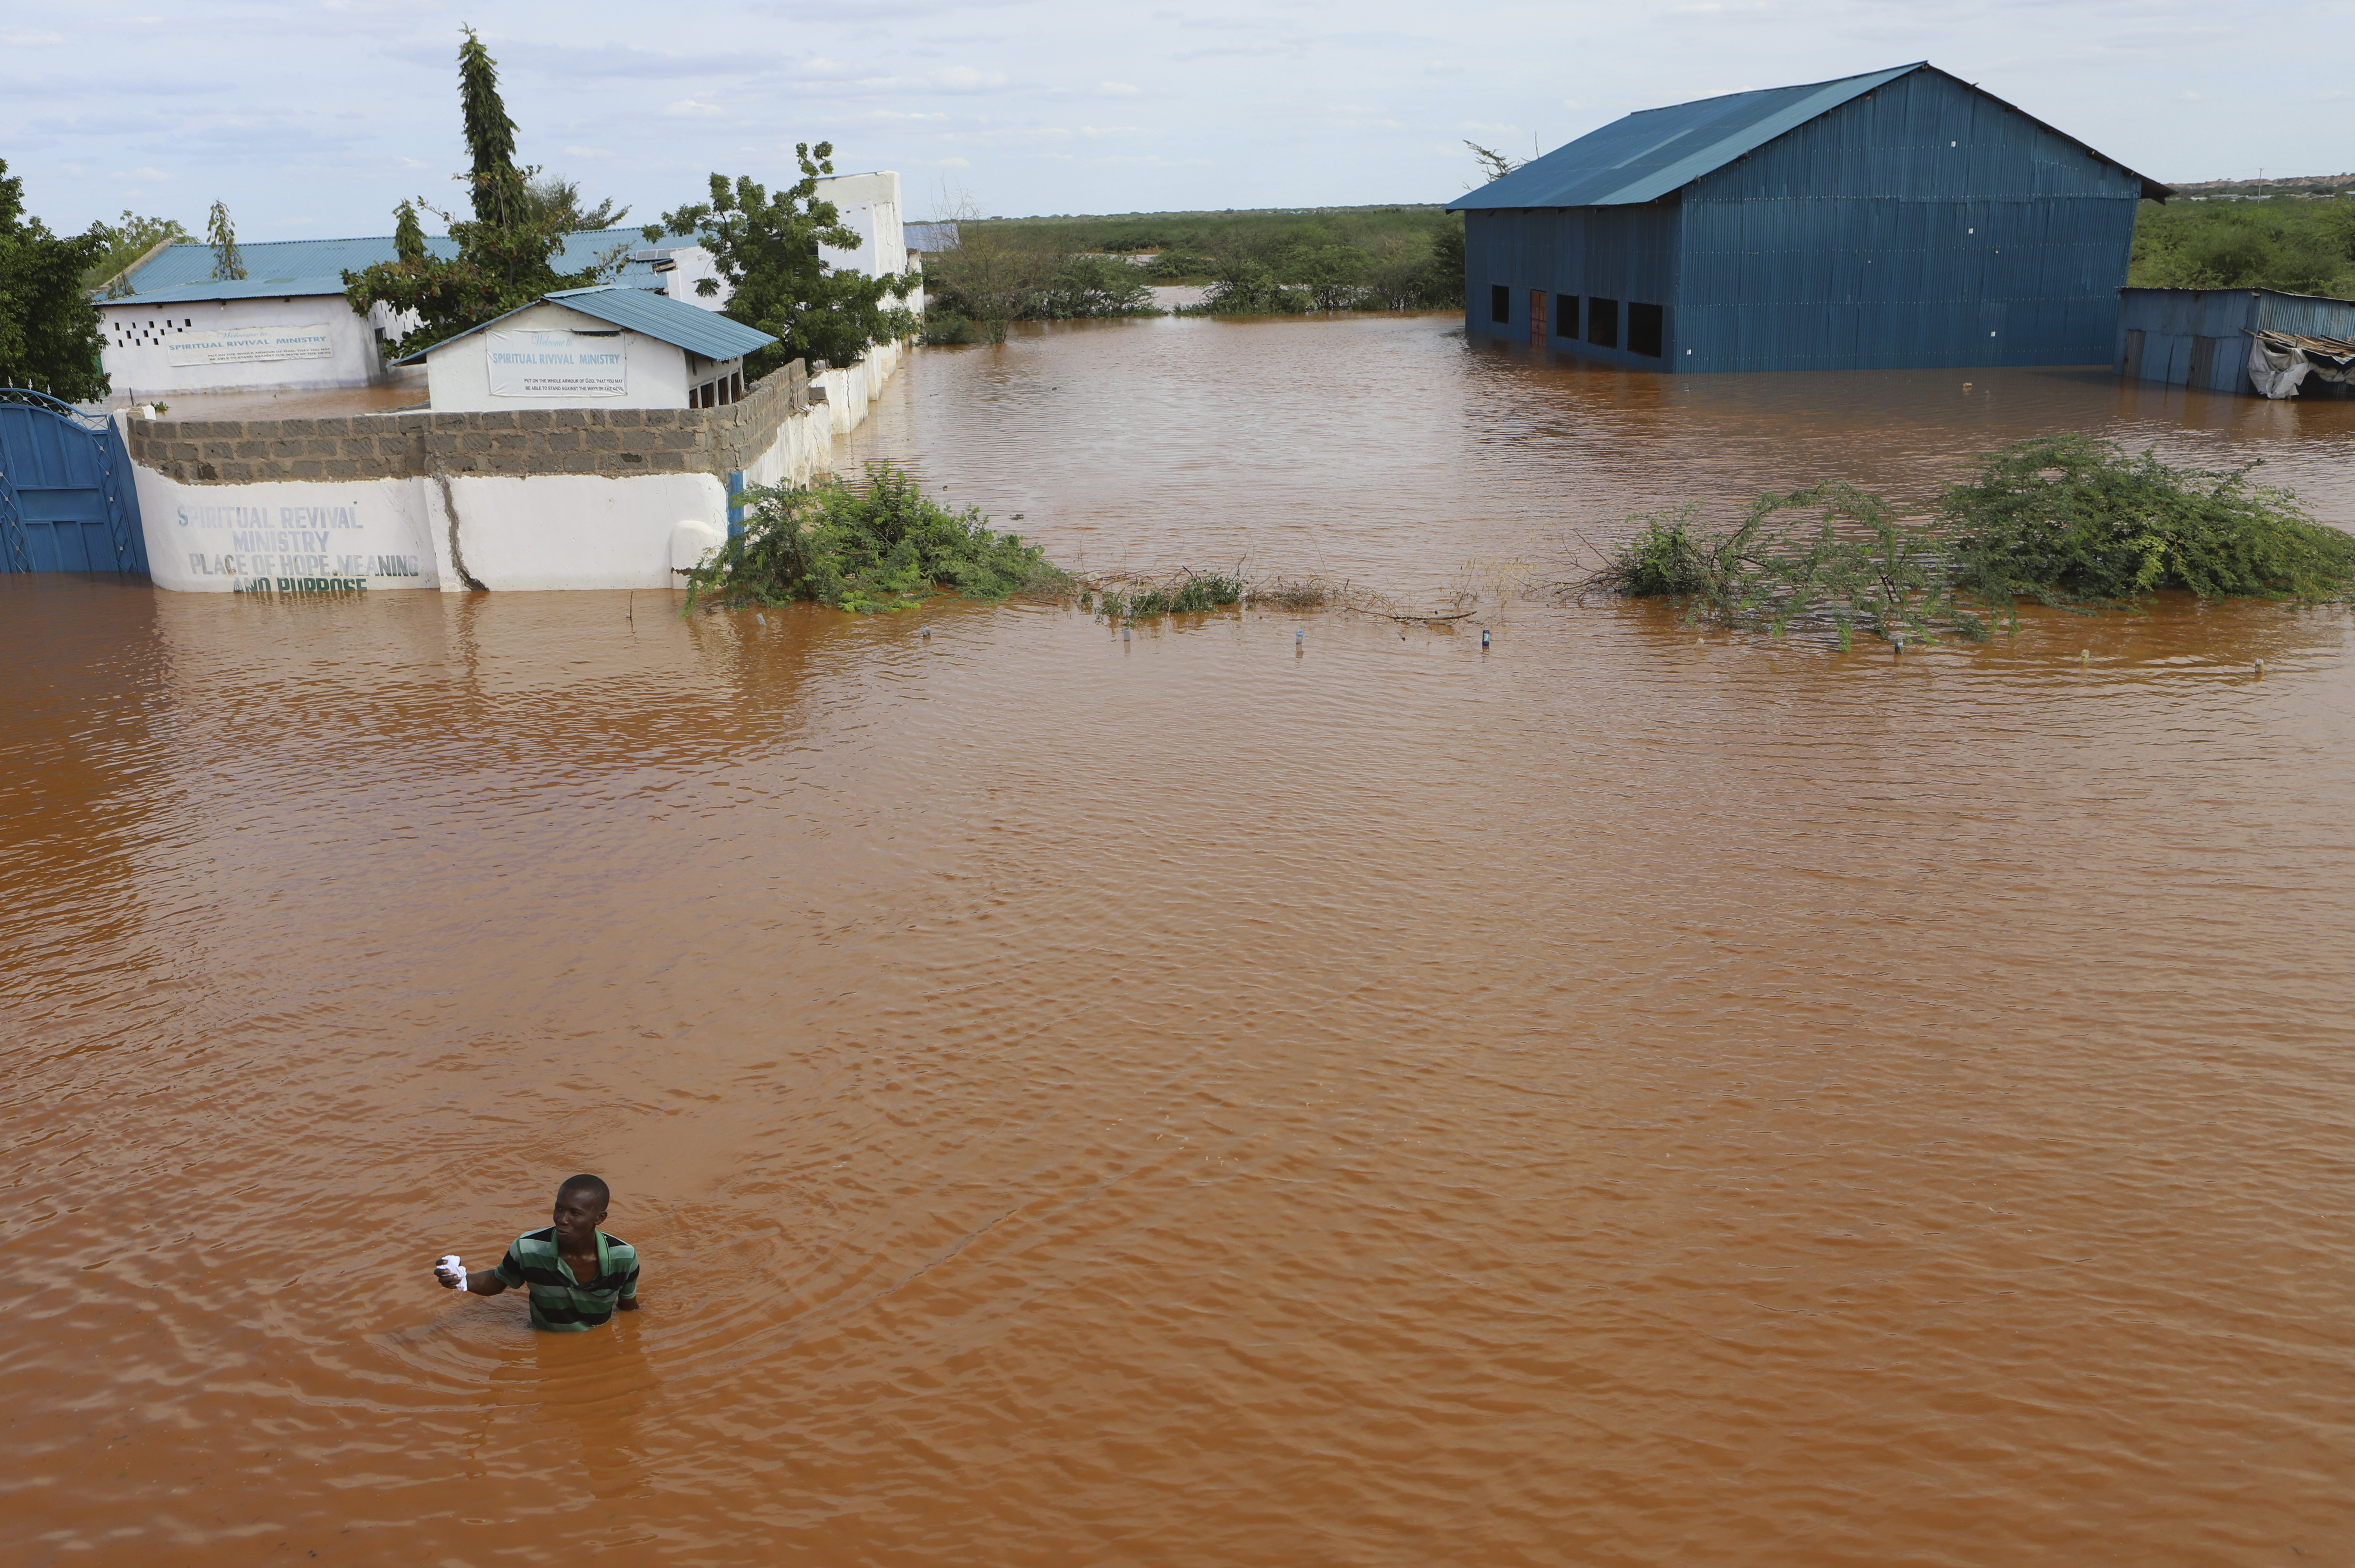 A man swims from a submerged church compound, after the River Tana broke its banks following heavy rains at Mororo, border of Tana River and Garissa counties, northeastern Kenya, April 28. Heavy rains pounding different parts of Kenya have led to dozens of deaths and the displacement of tens of thousands of people, according to the United Nations.